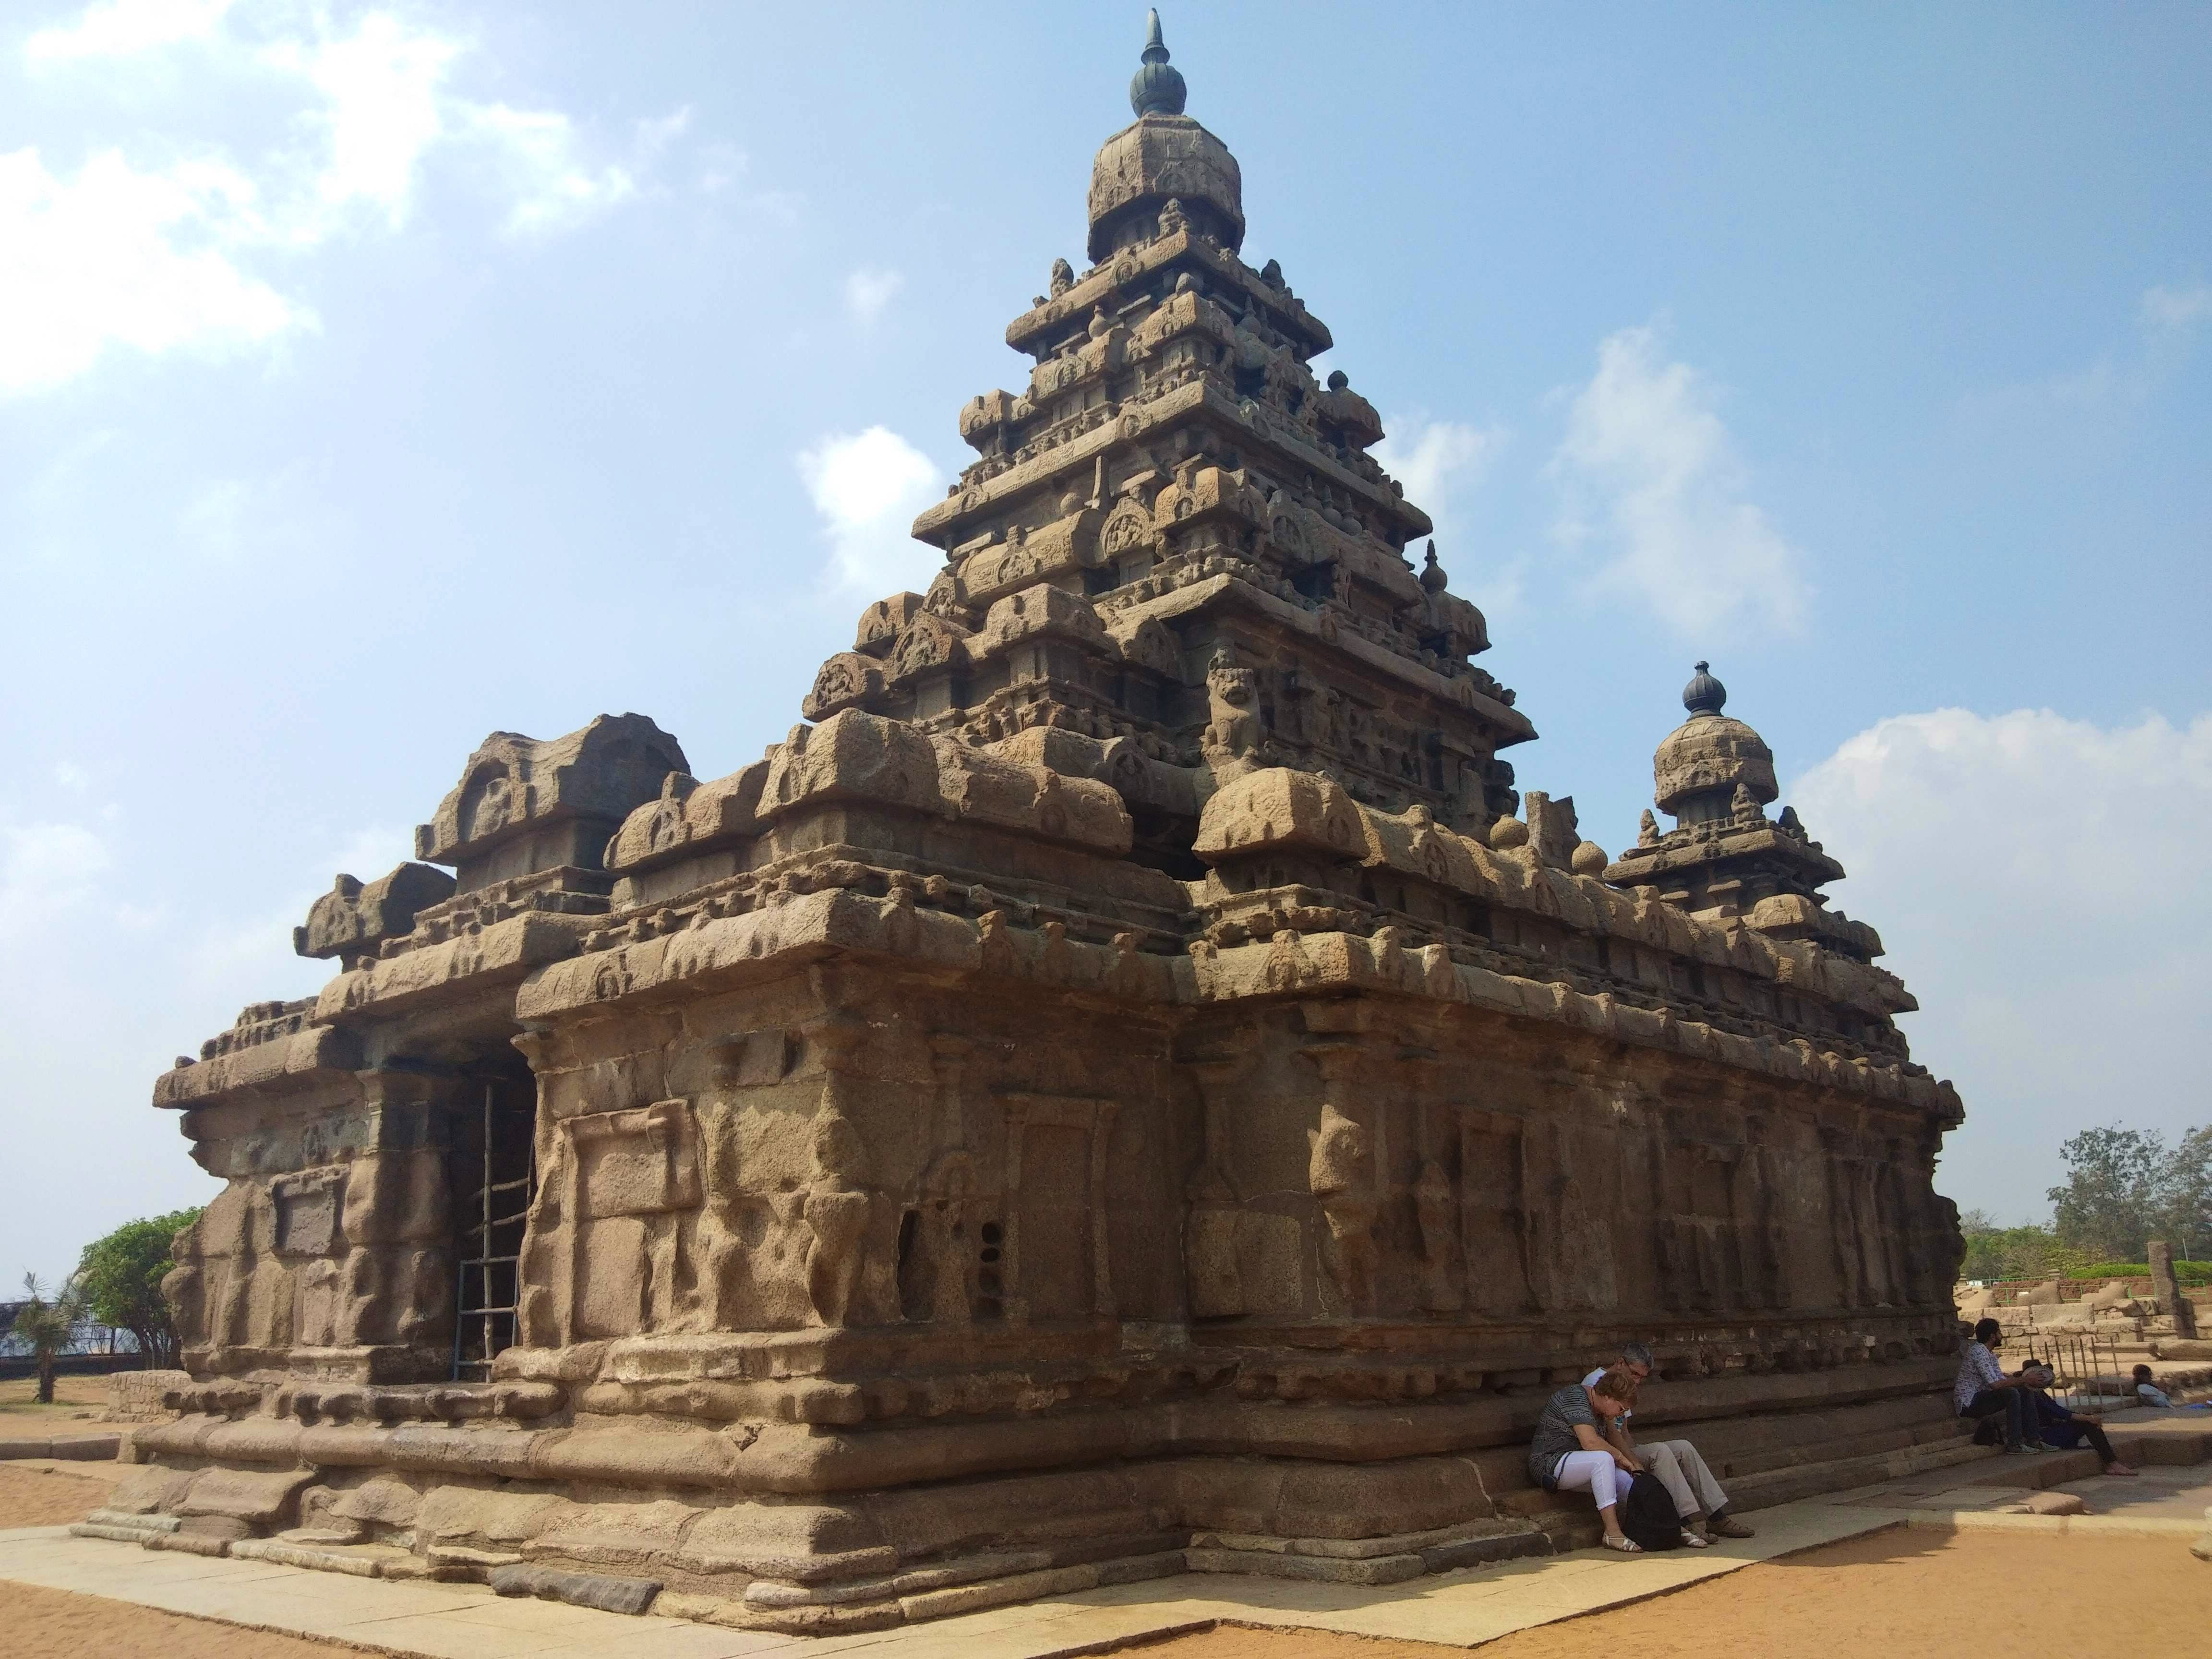 Hindu temple,Historic site,Landmark,Temple,Place of worship,Building,Temple,Ancient history,Architecture,Carving